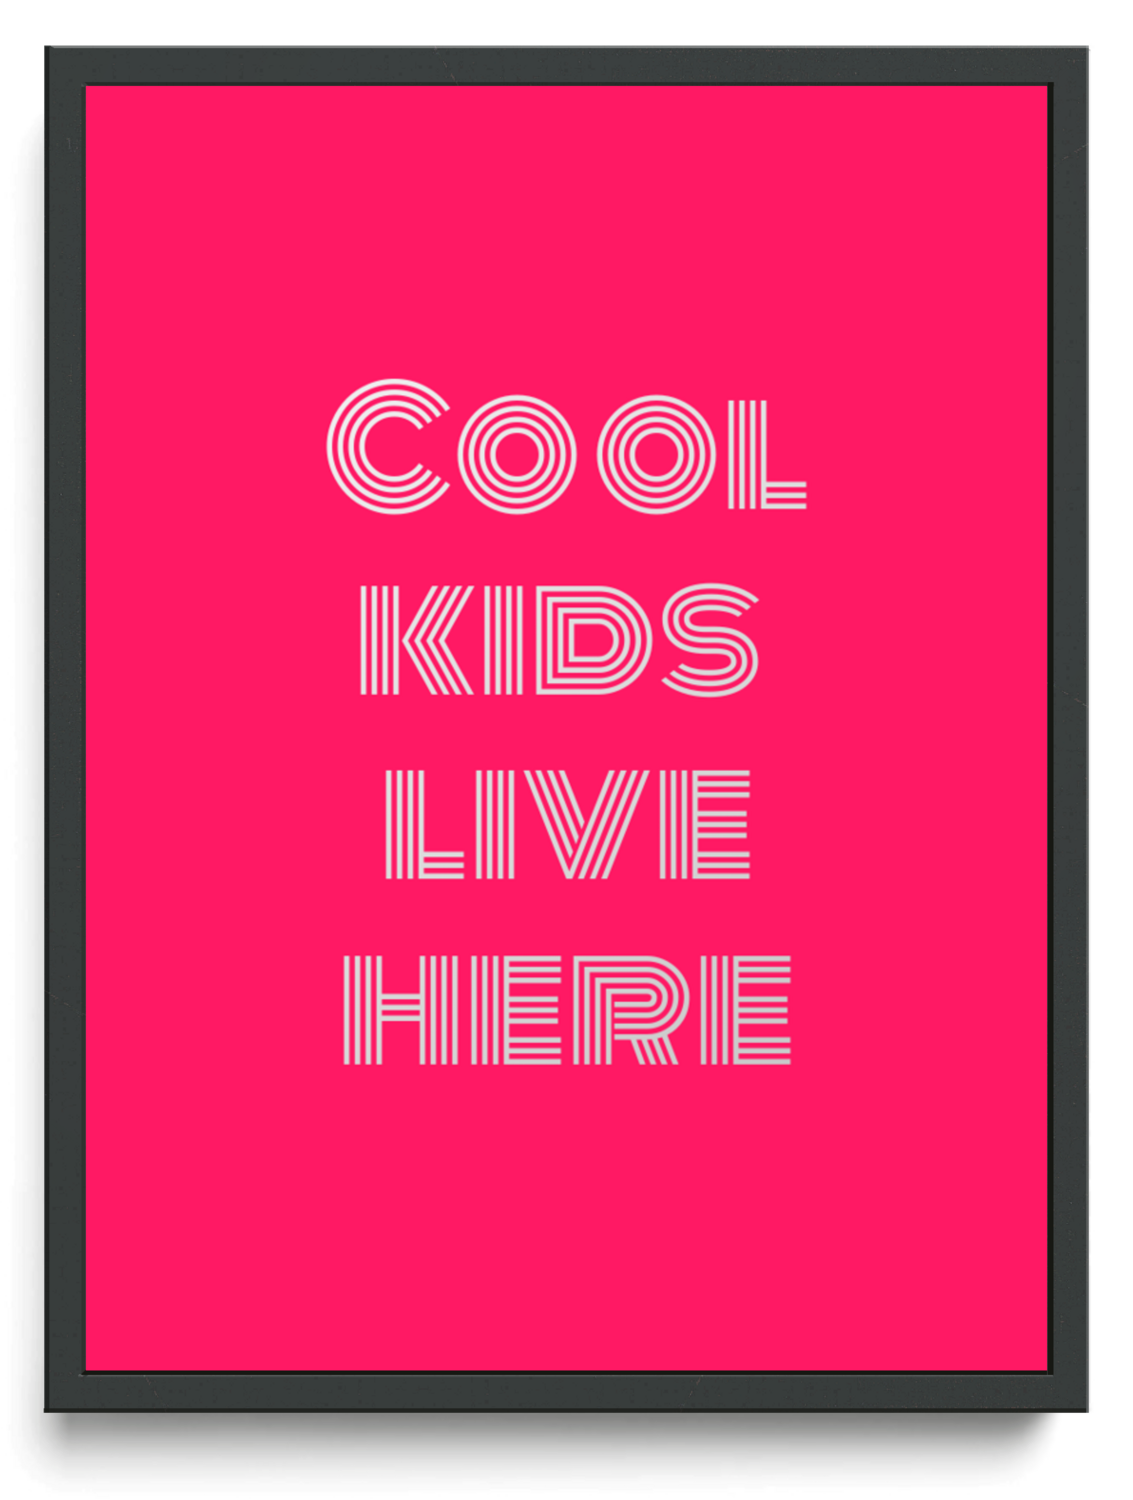 Cool kids live here framed typographic print